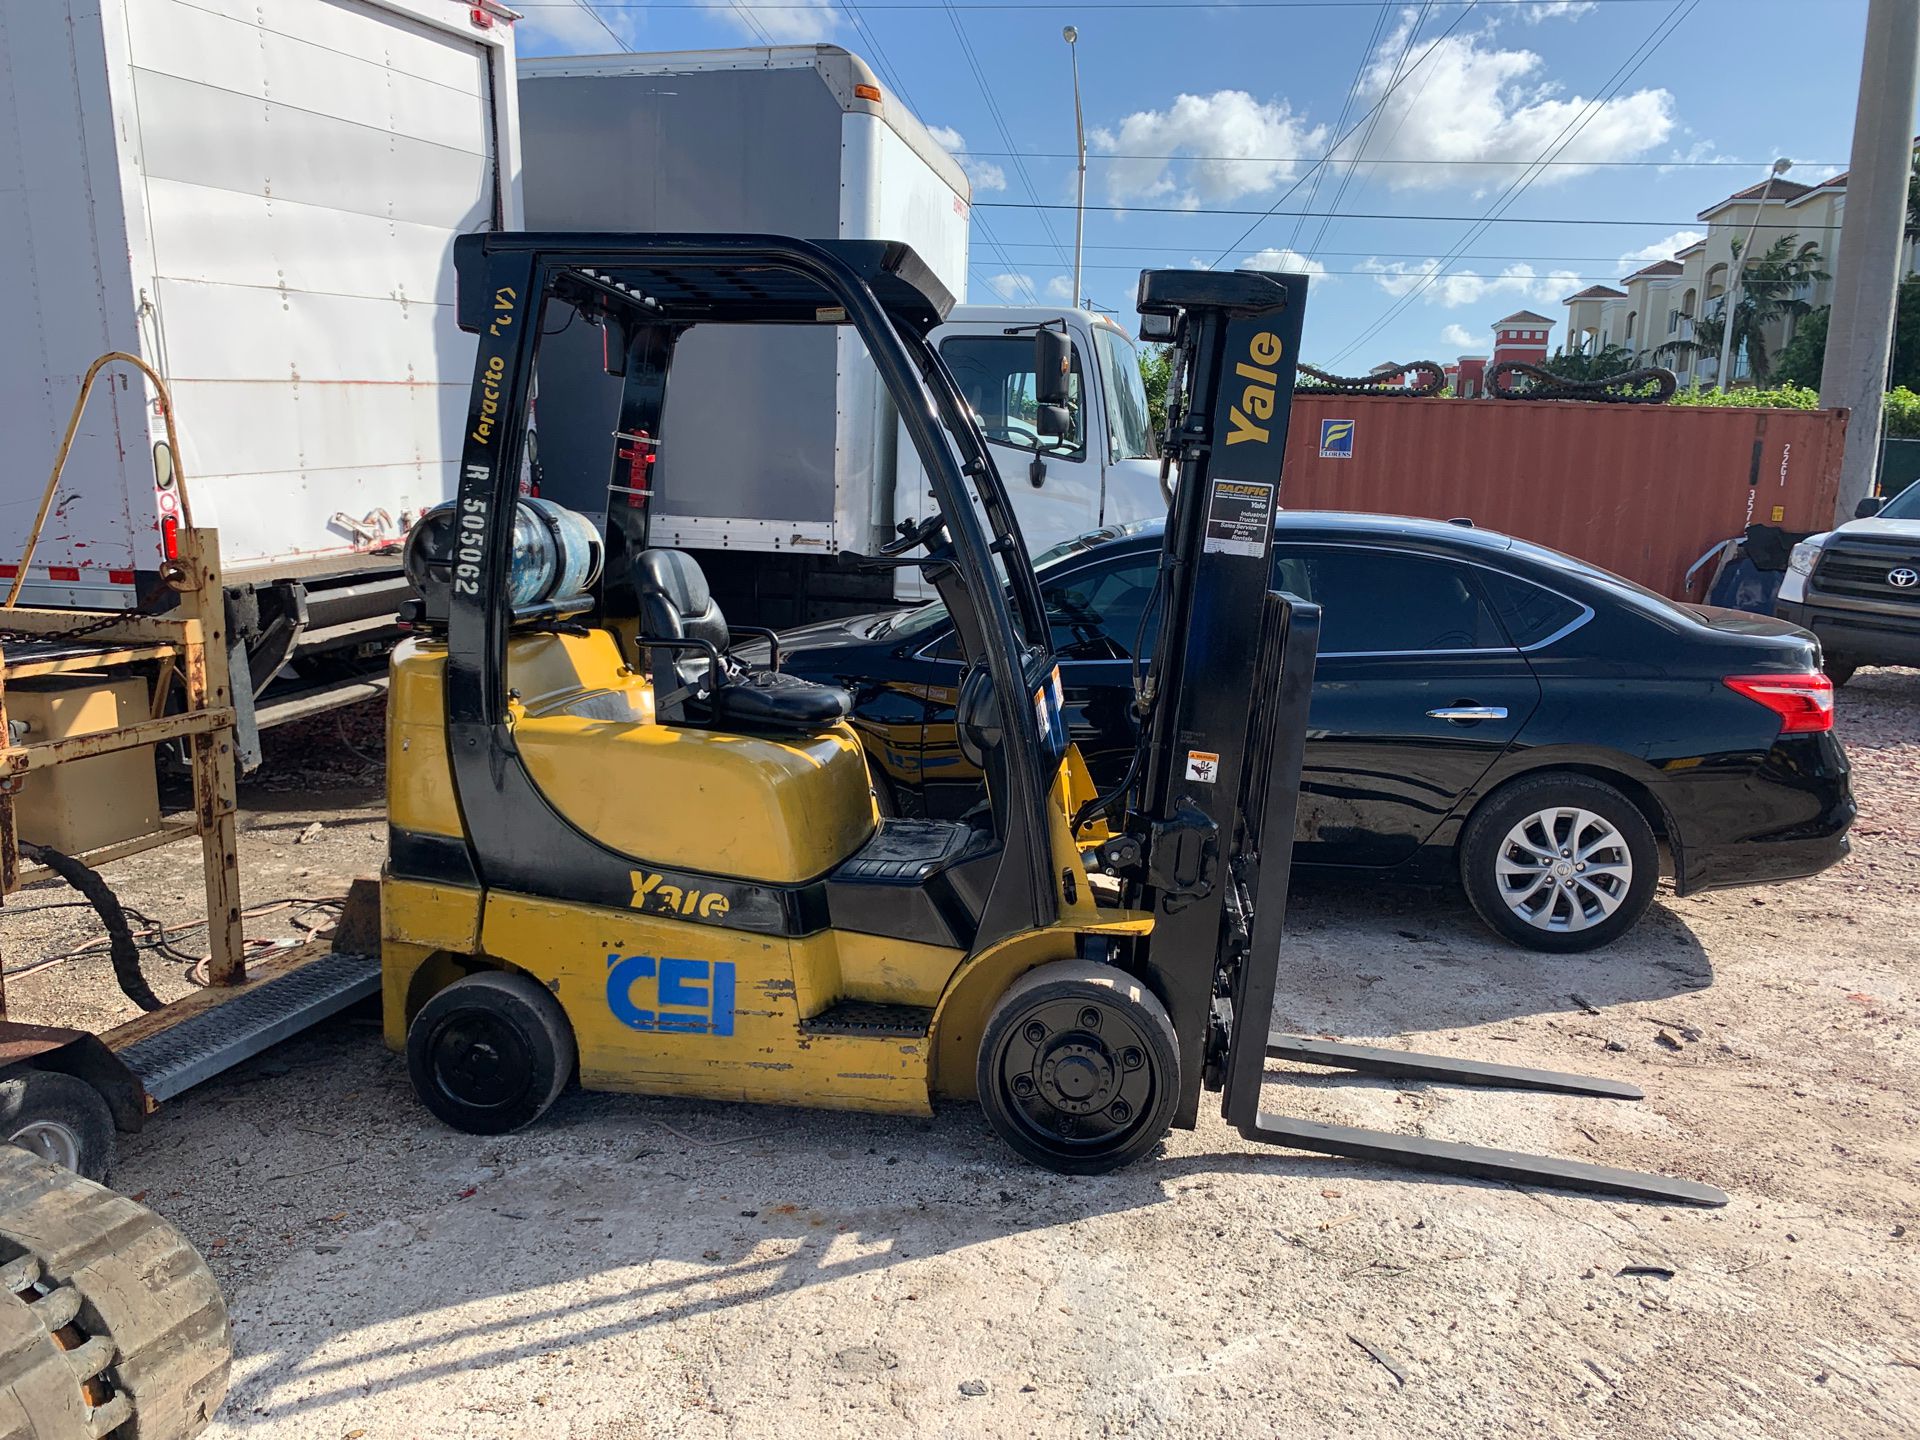 2007 Yale forklift 6000 pounds 1484 hours